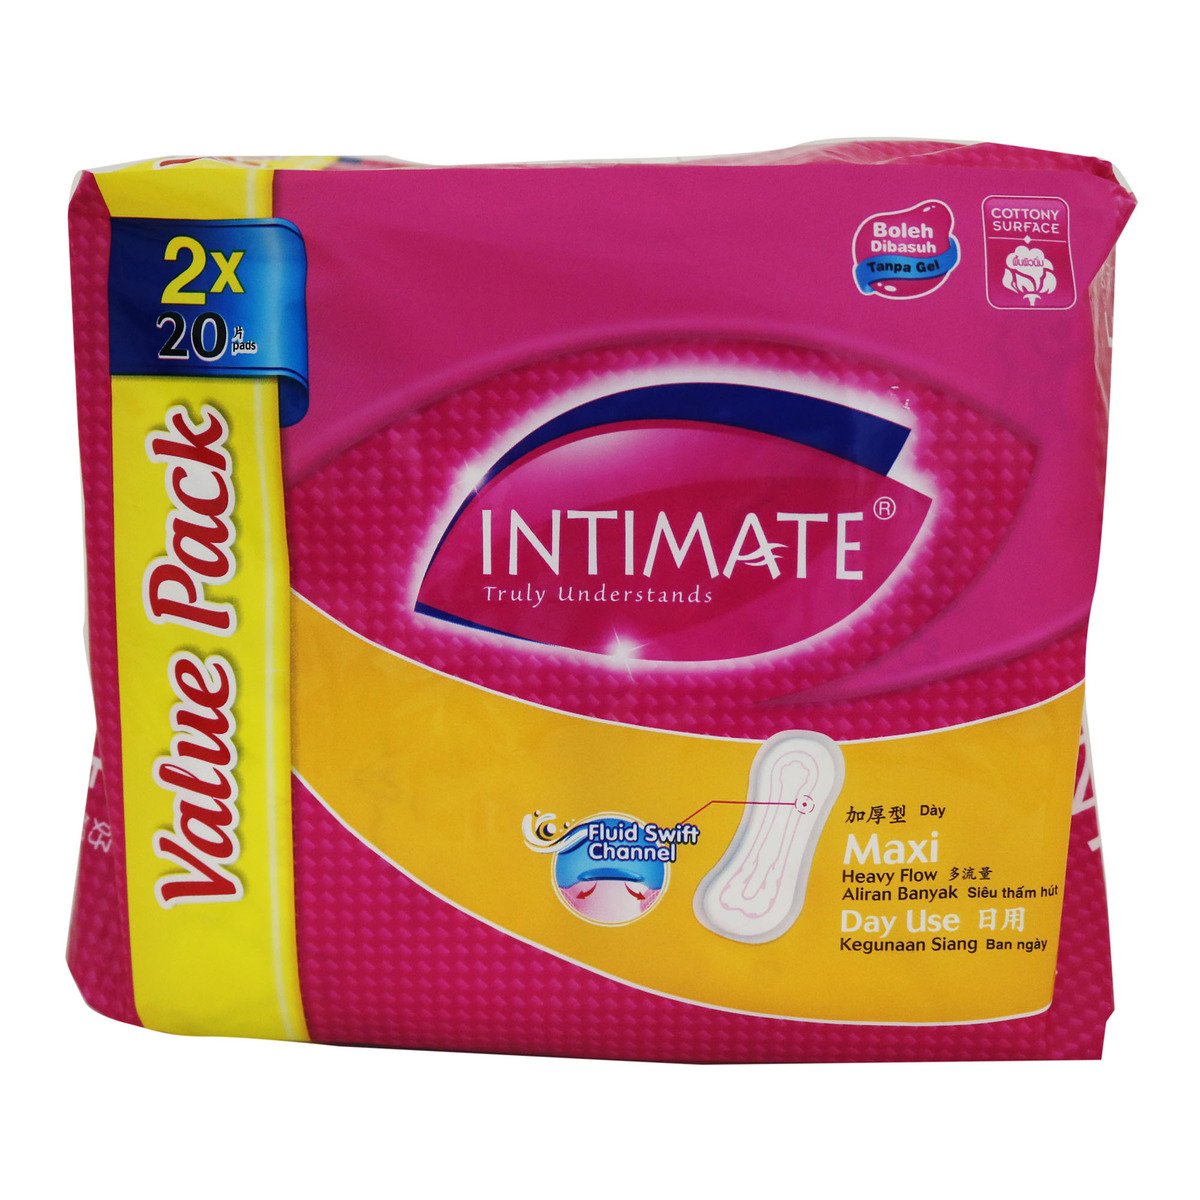 Intimate Daylite Maxi 2 x 20 Counts